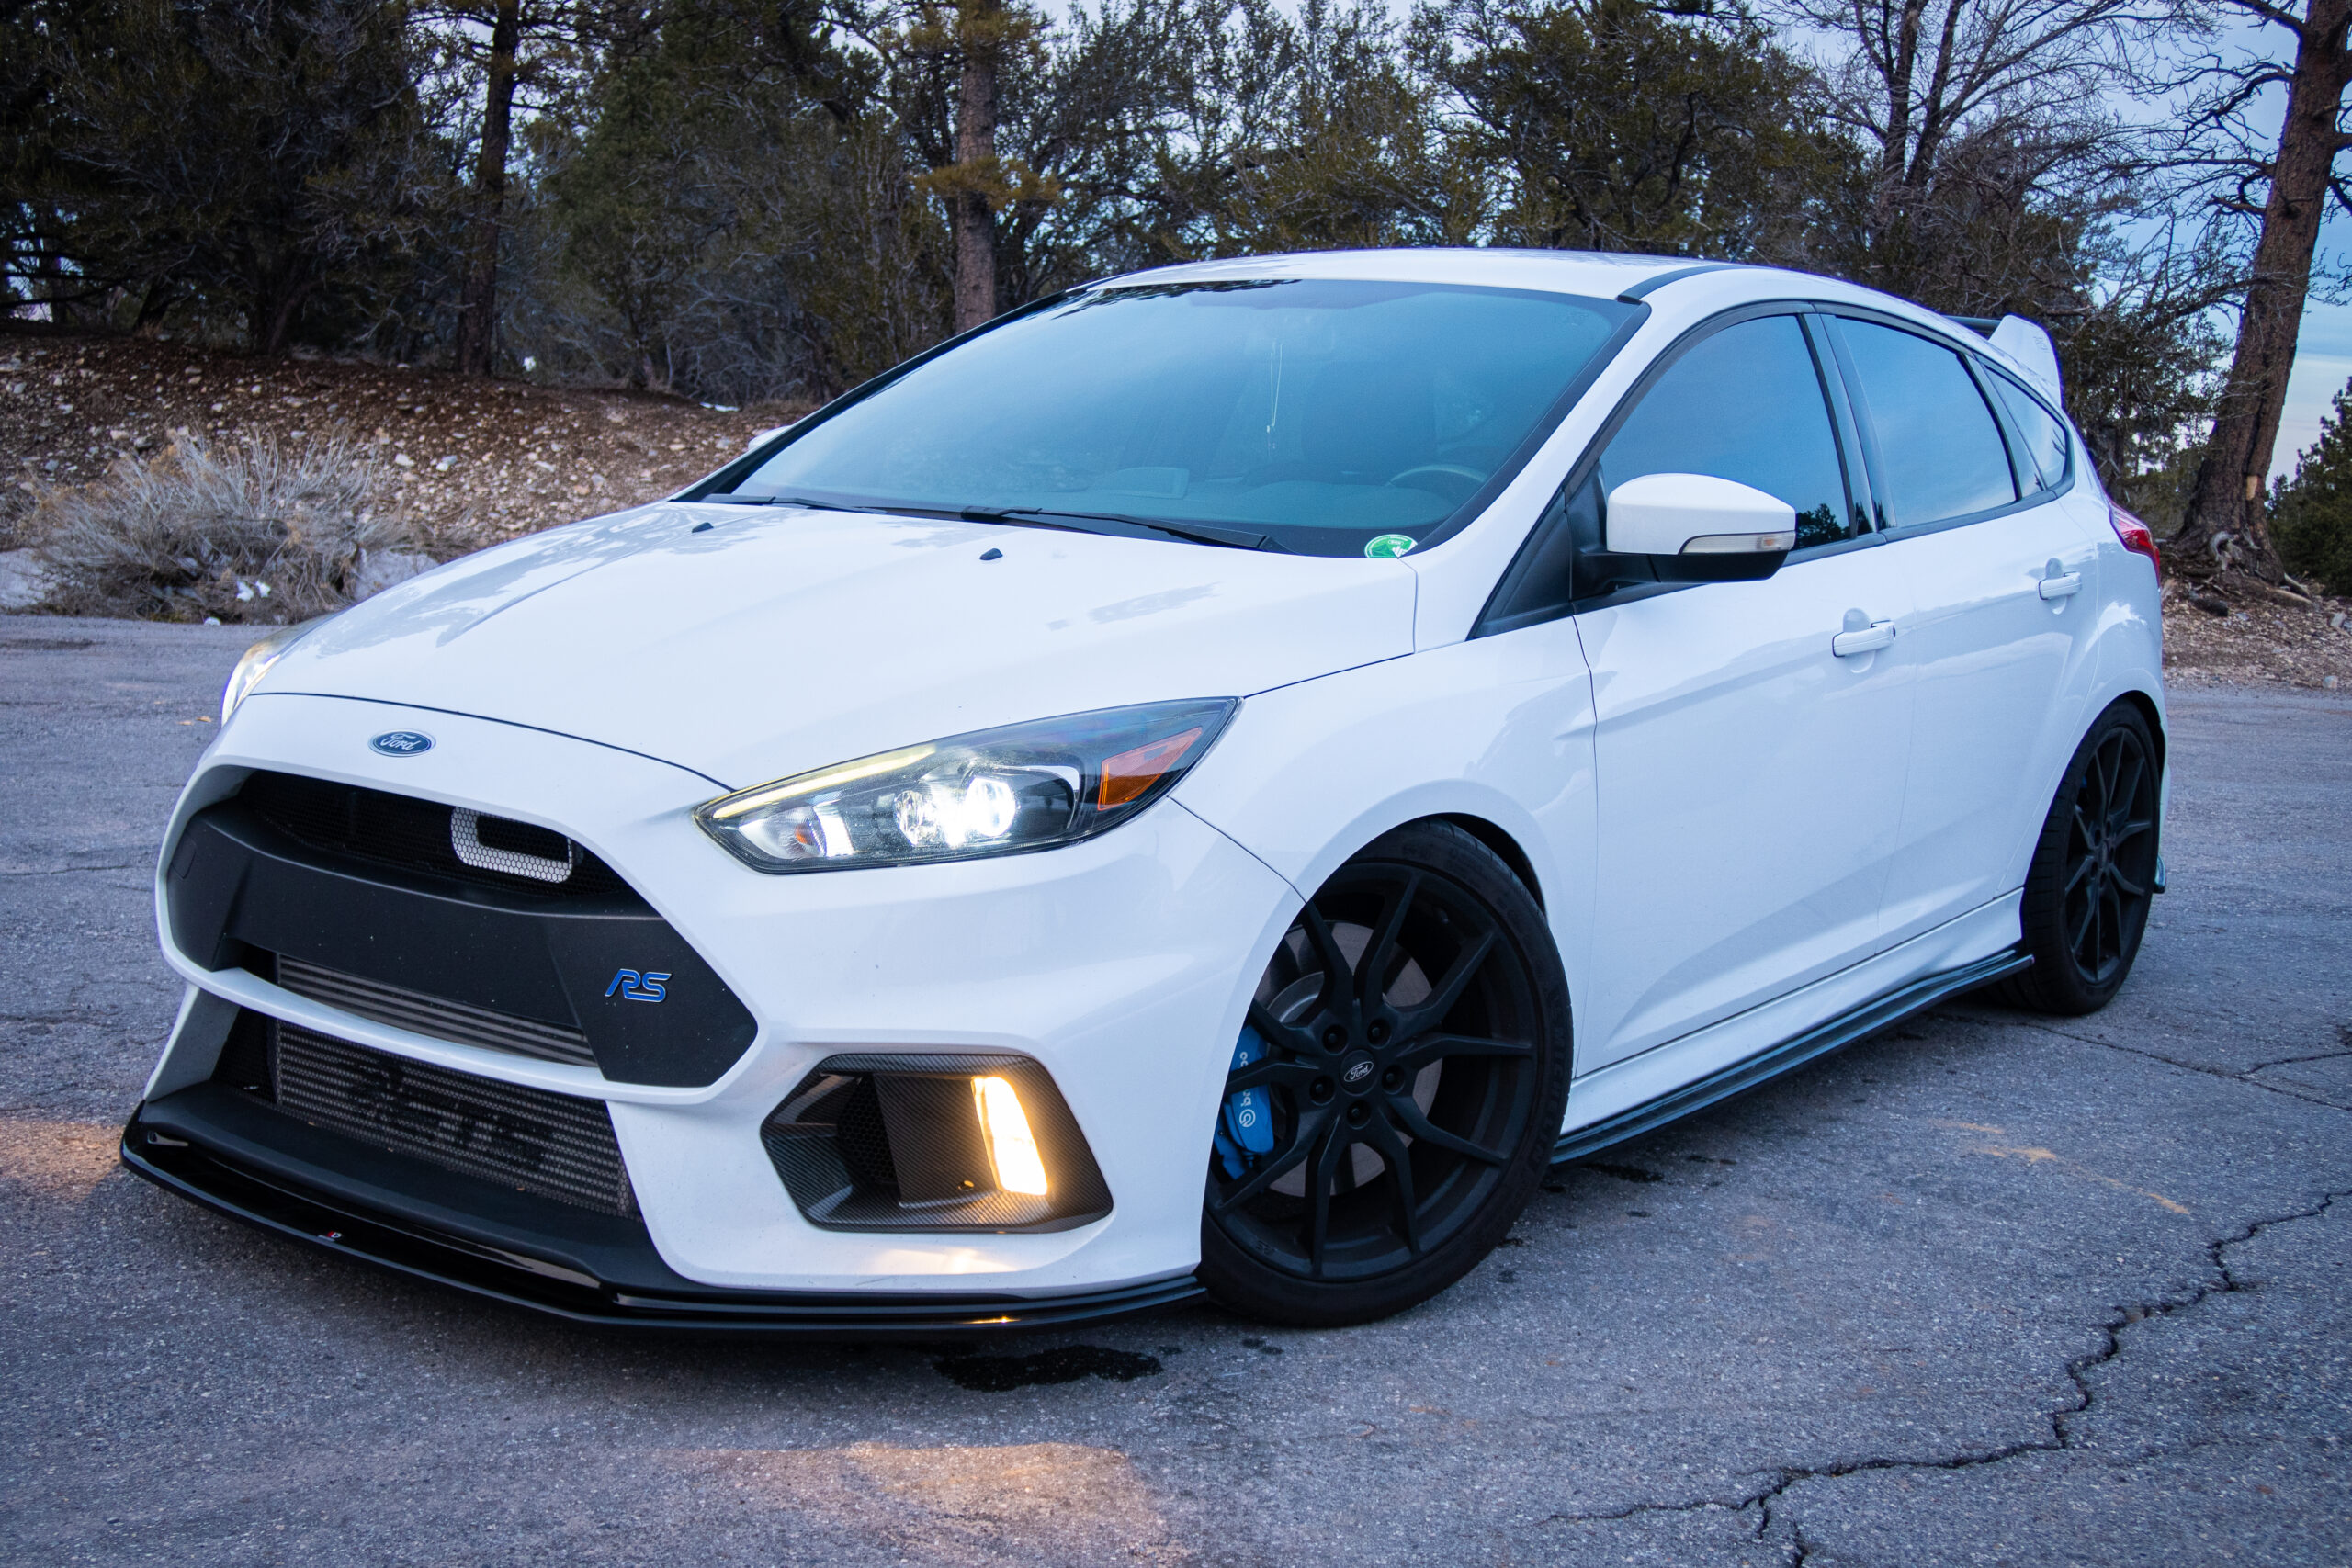 Bargain Bin Review: The Ford Focus RS is Still Worthy of your Rally Car  Dreams